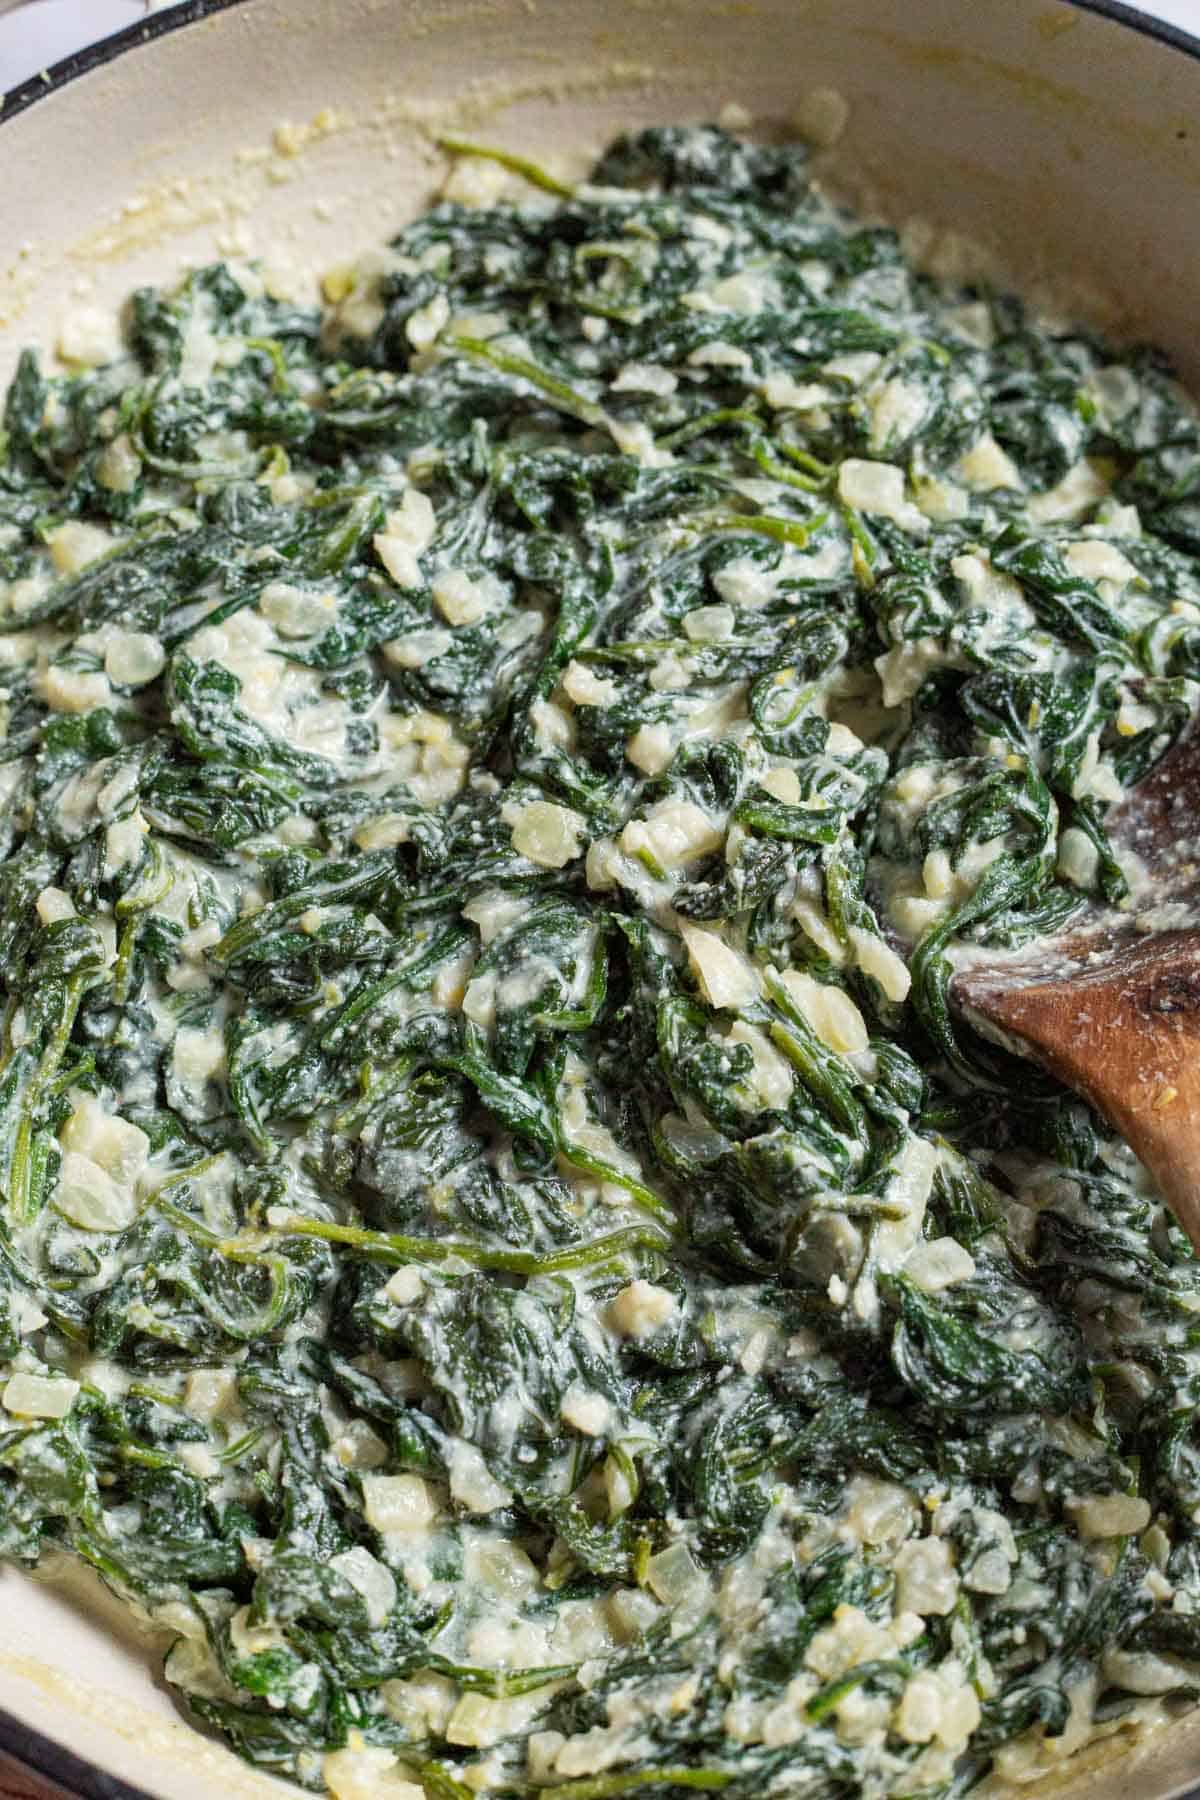 A close up of creamed spinach in a skillet with a wooden spoon.